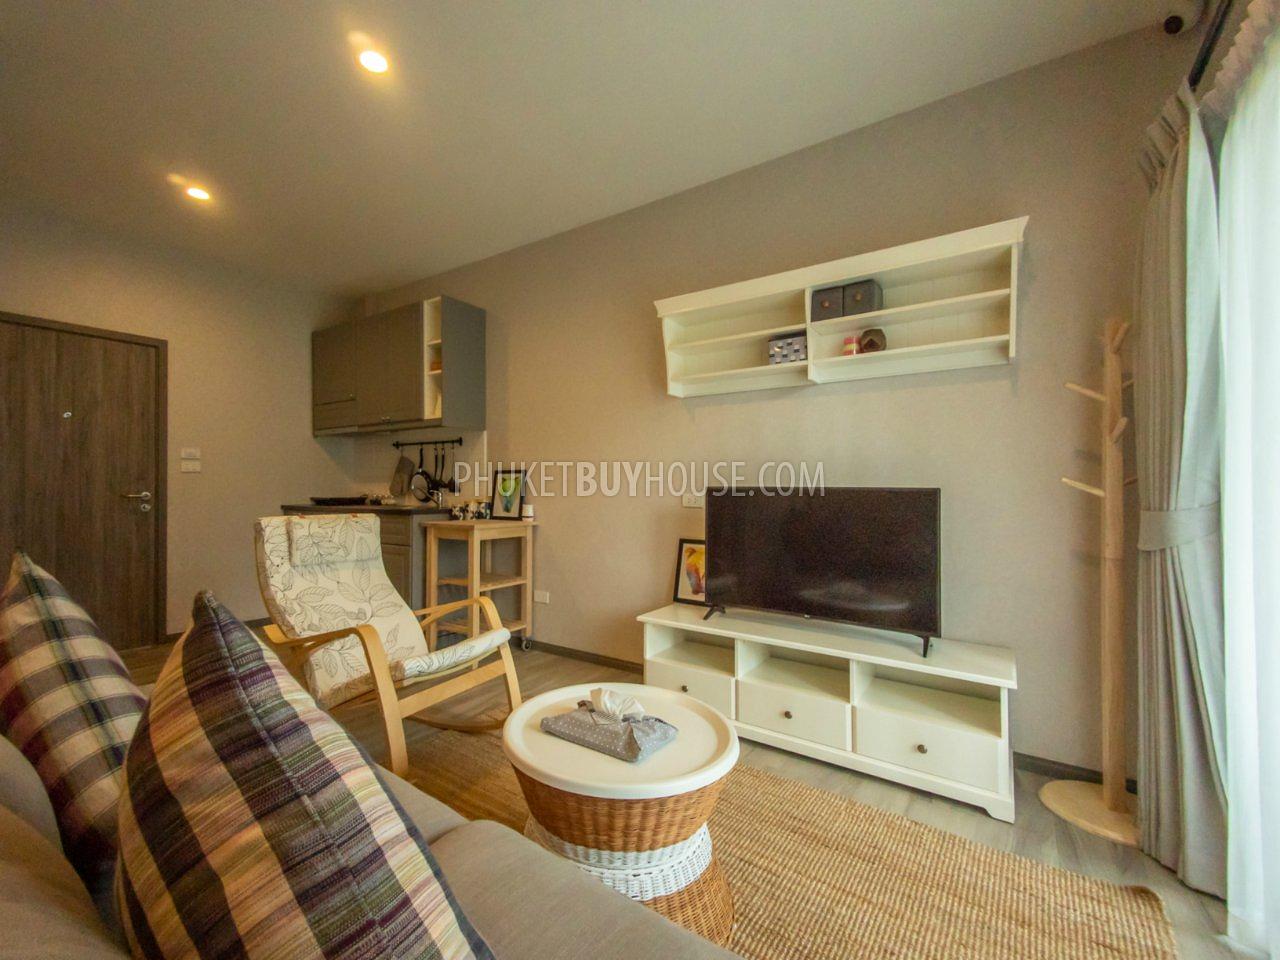 NAY6197: 1 Bedroom Apartment in a New Project within Walking Distance to Nai Yang Beach. Photo #6